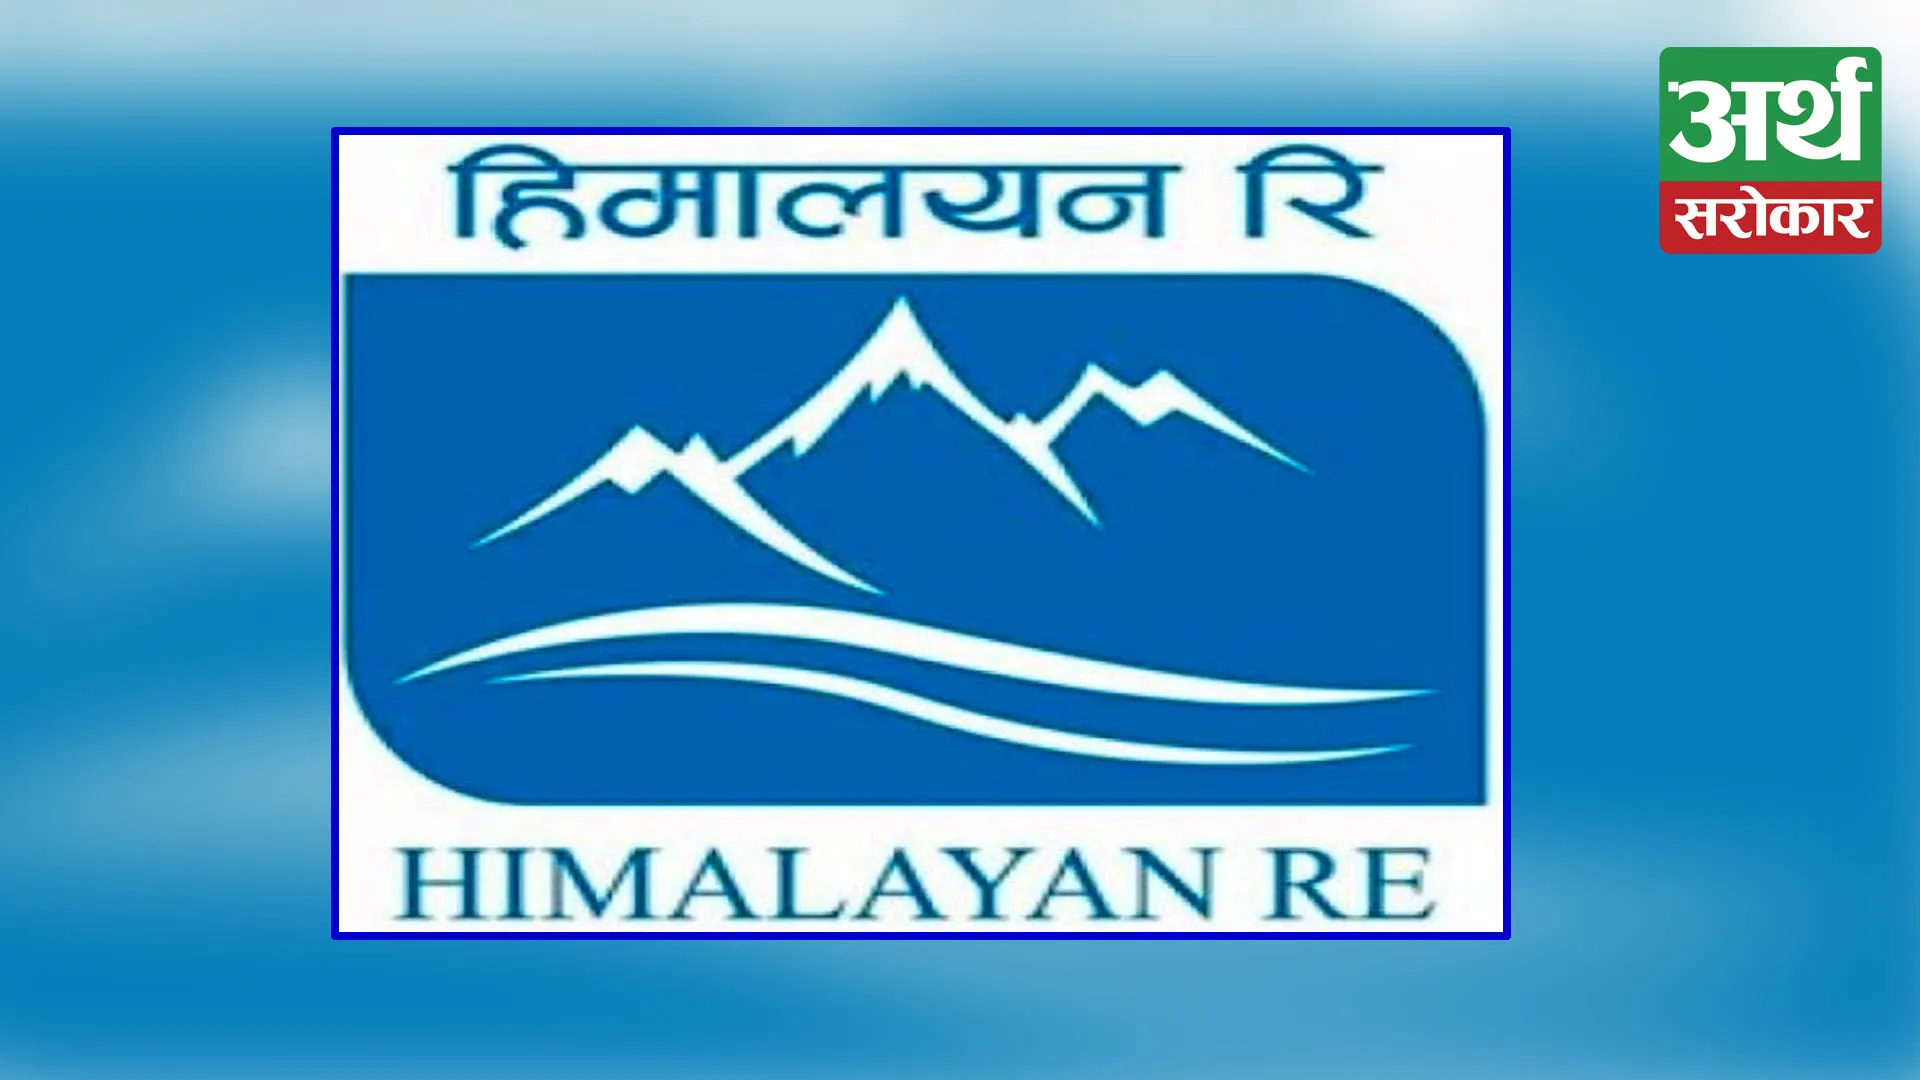 Himalayan Reinsurance announced an IPO at a premium price for Nepali individuals working in foreign